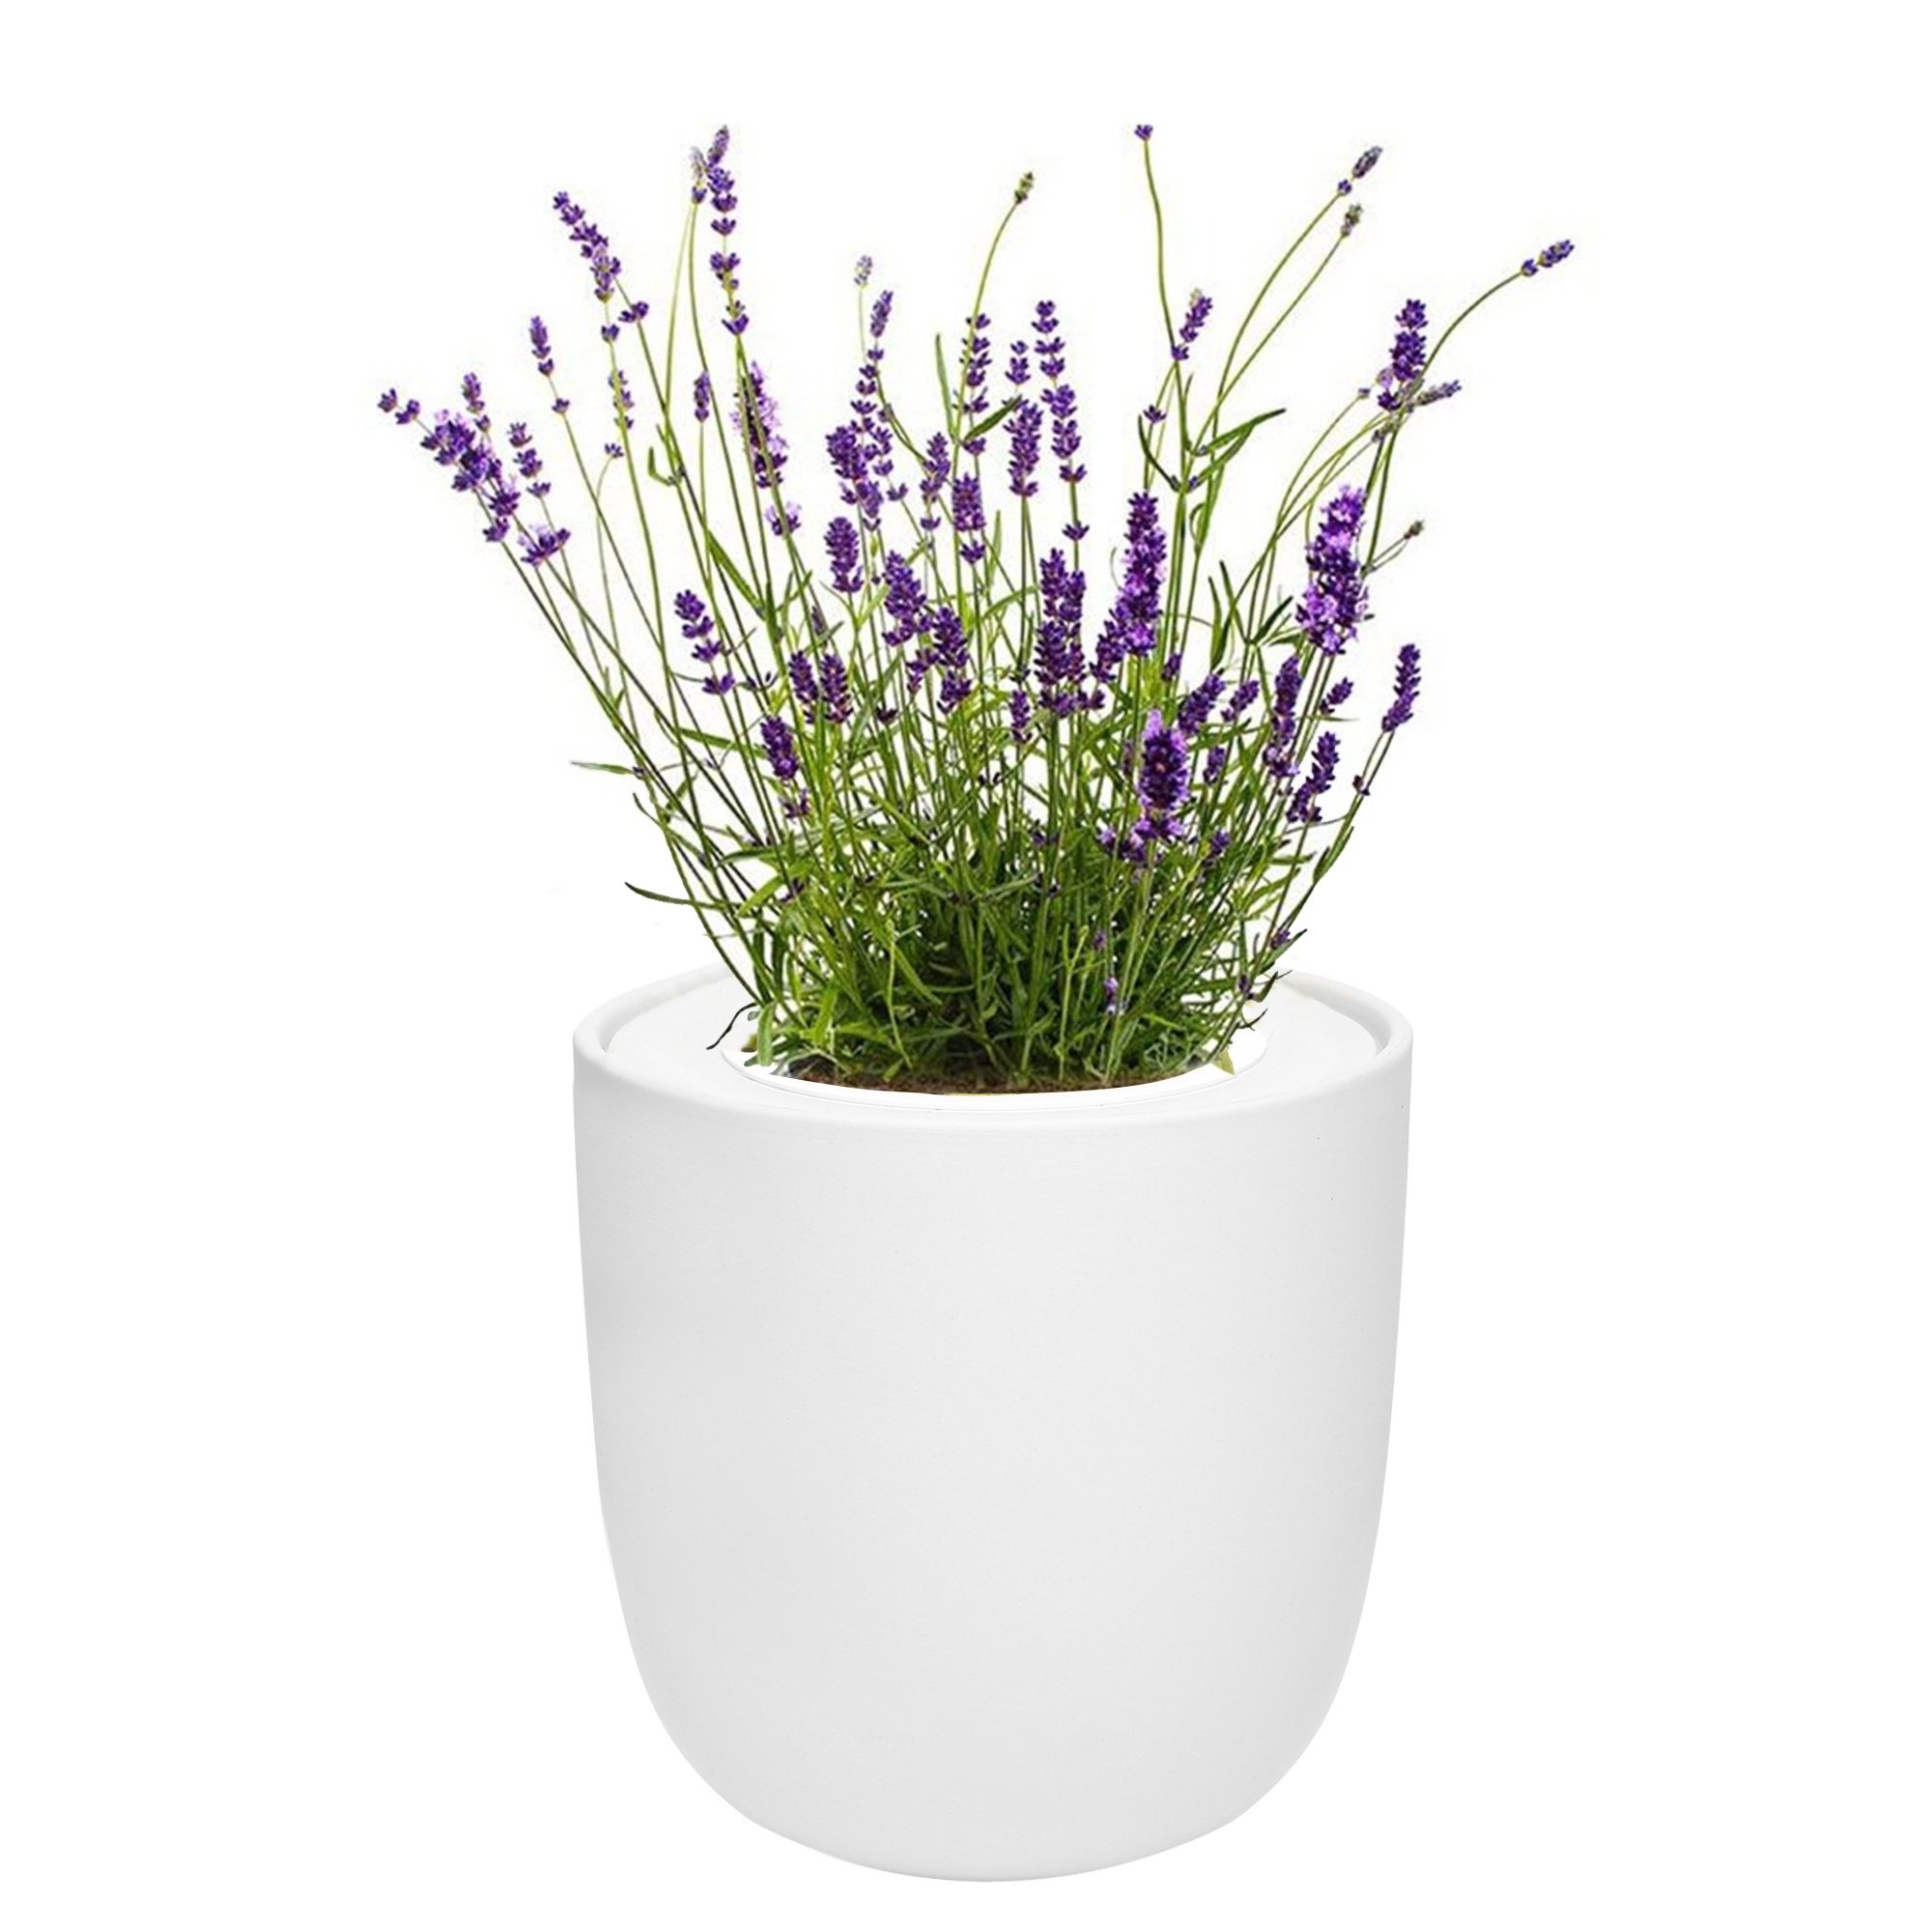 Lavender White Ceramic Pot Hydroponic Growing Kit with Seeds